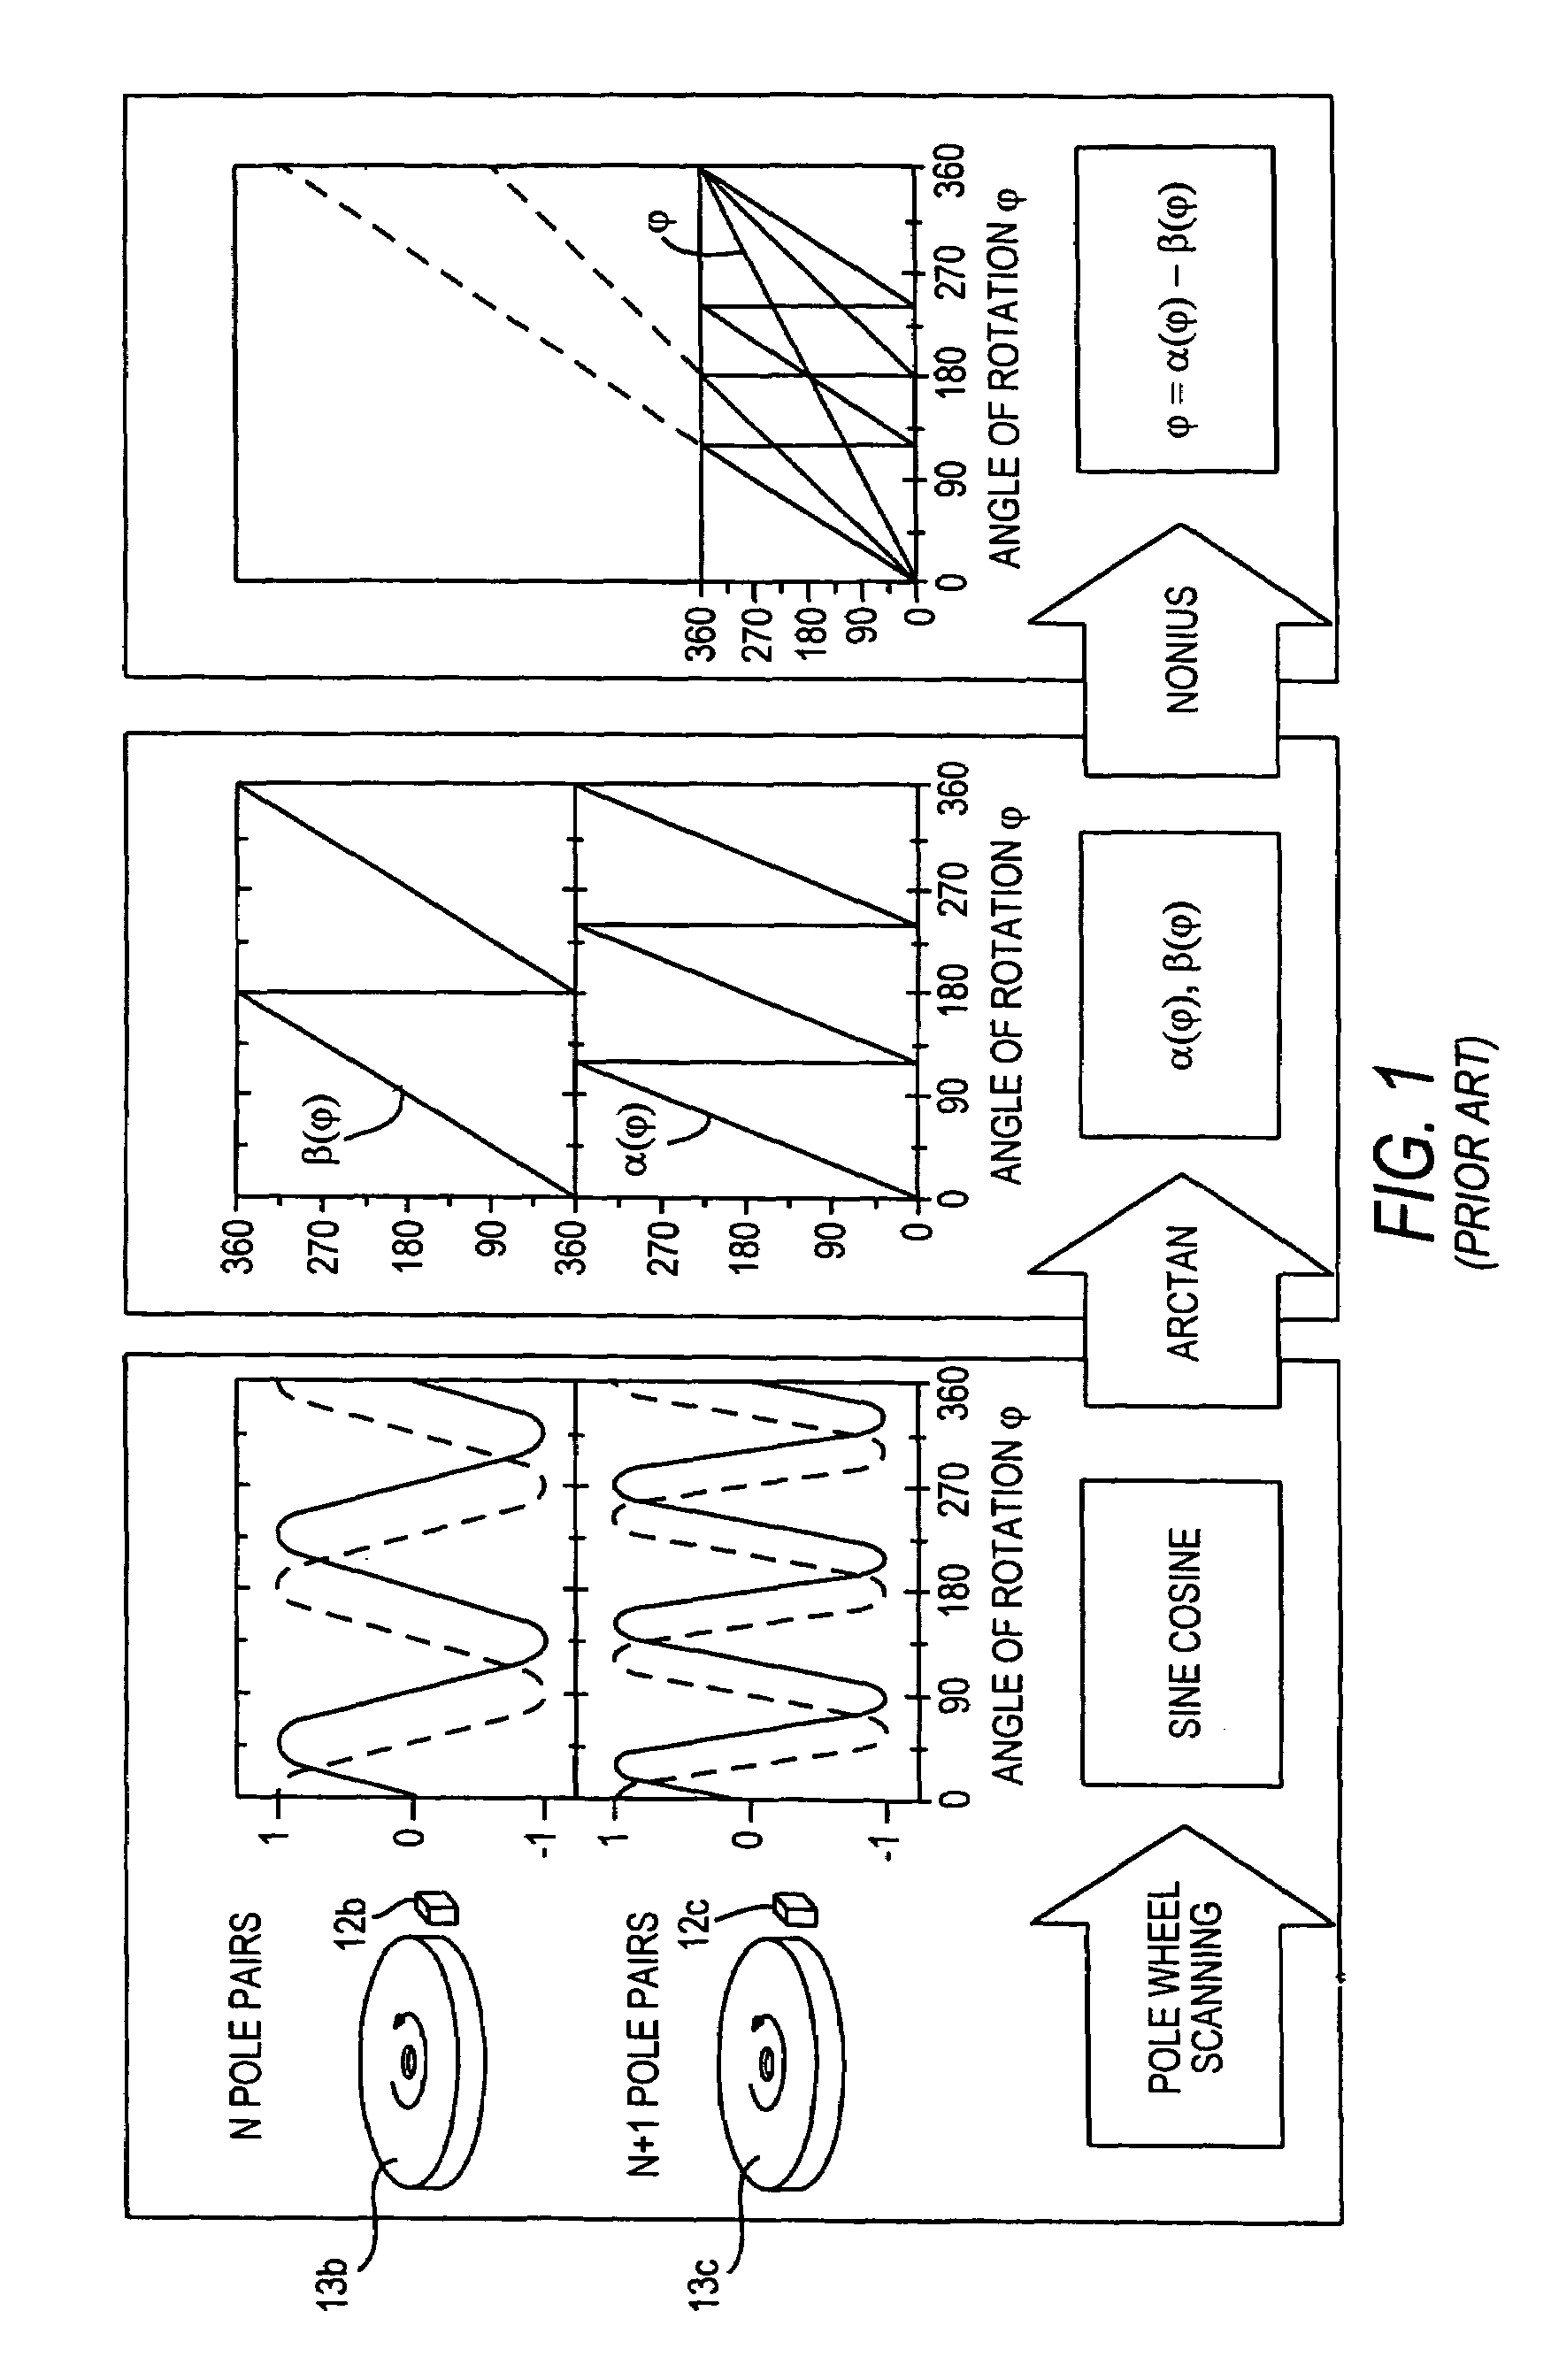 Device and method for measuring angles